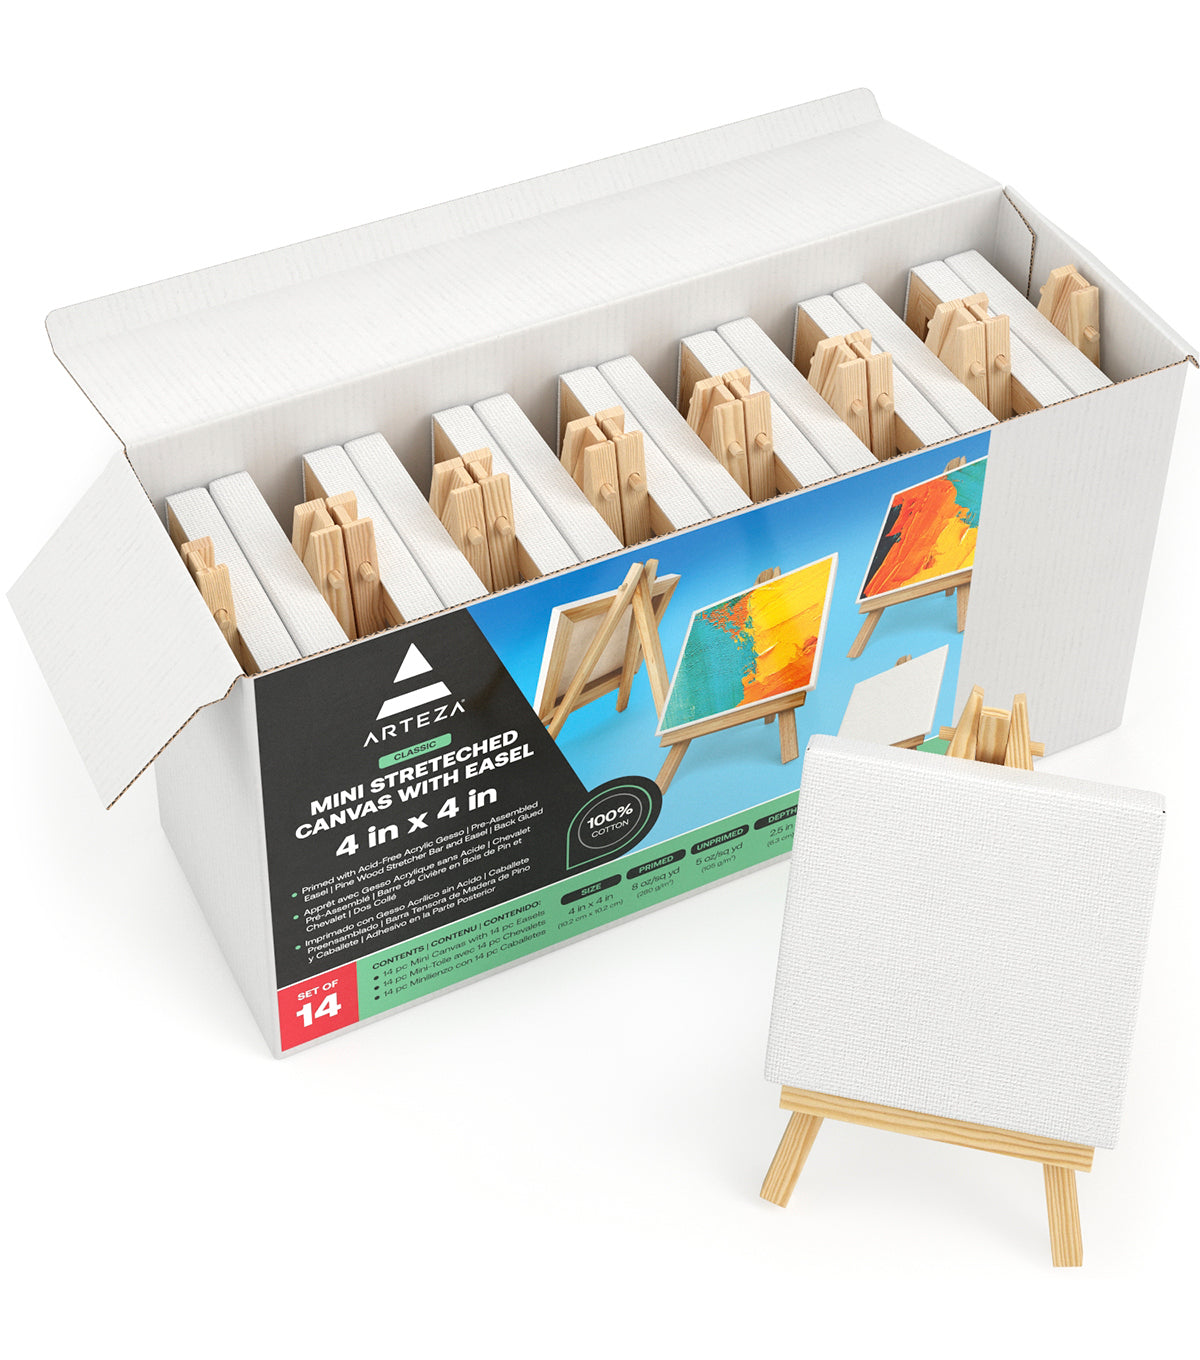 Mini Stretched Canvas, 4 x 4 - Pack of 14 –